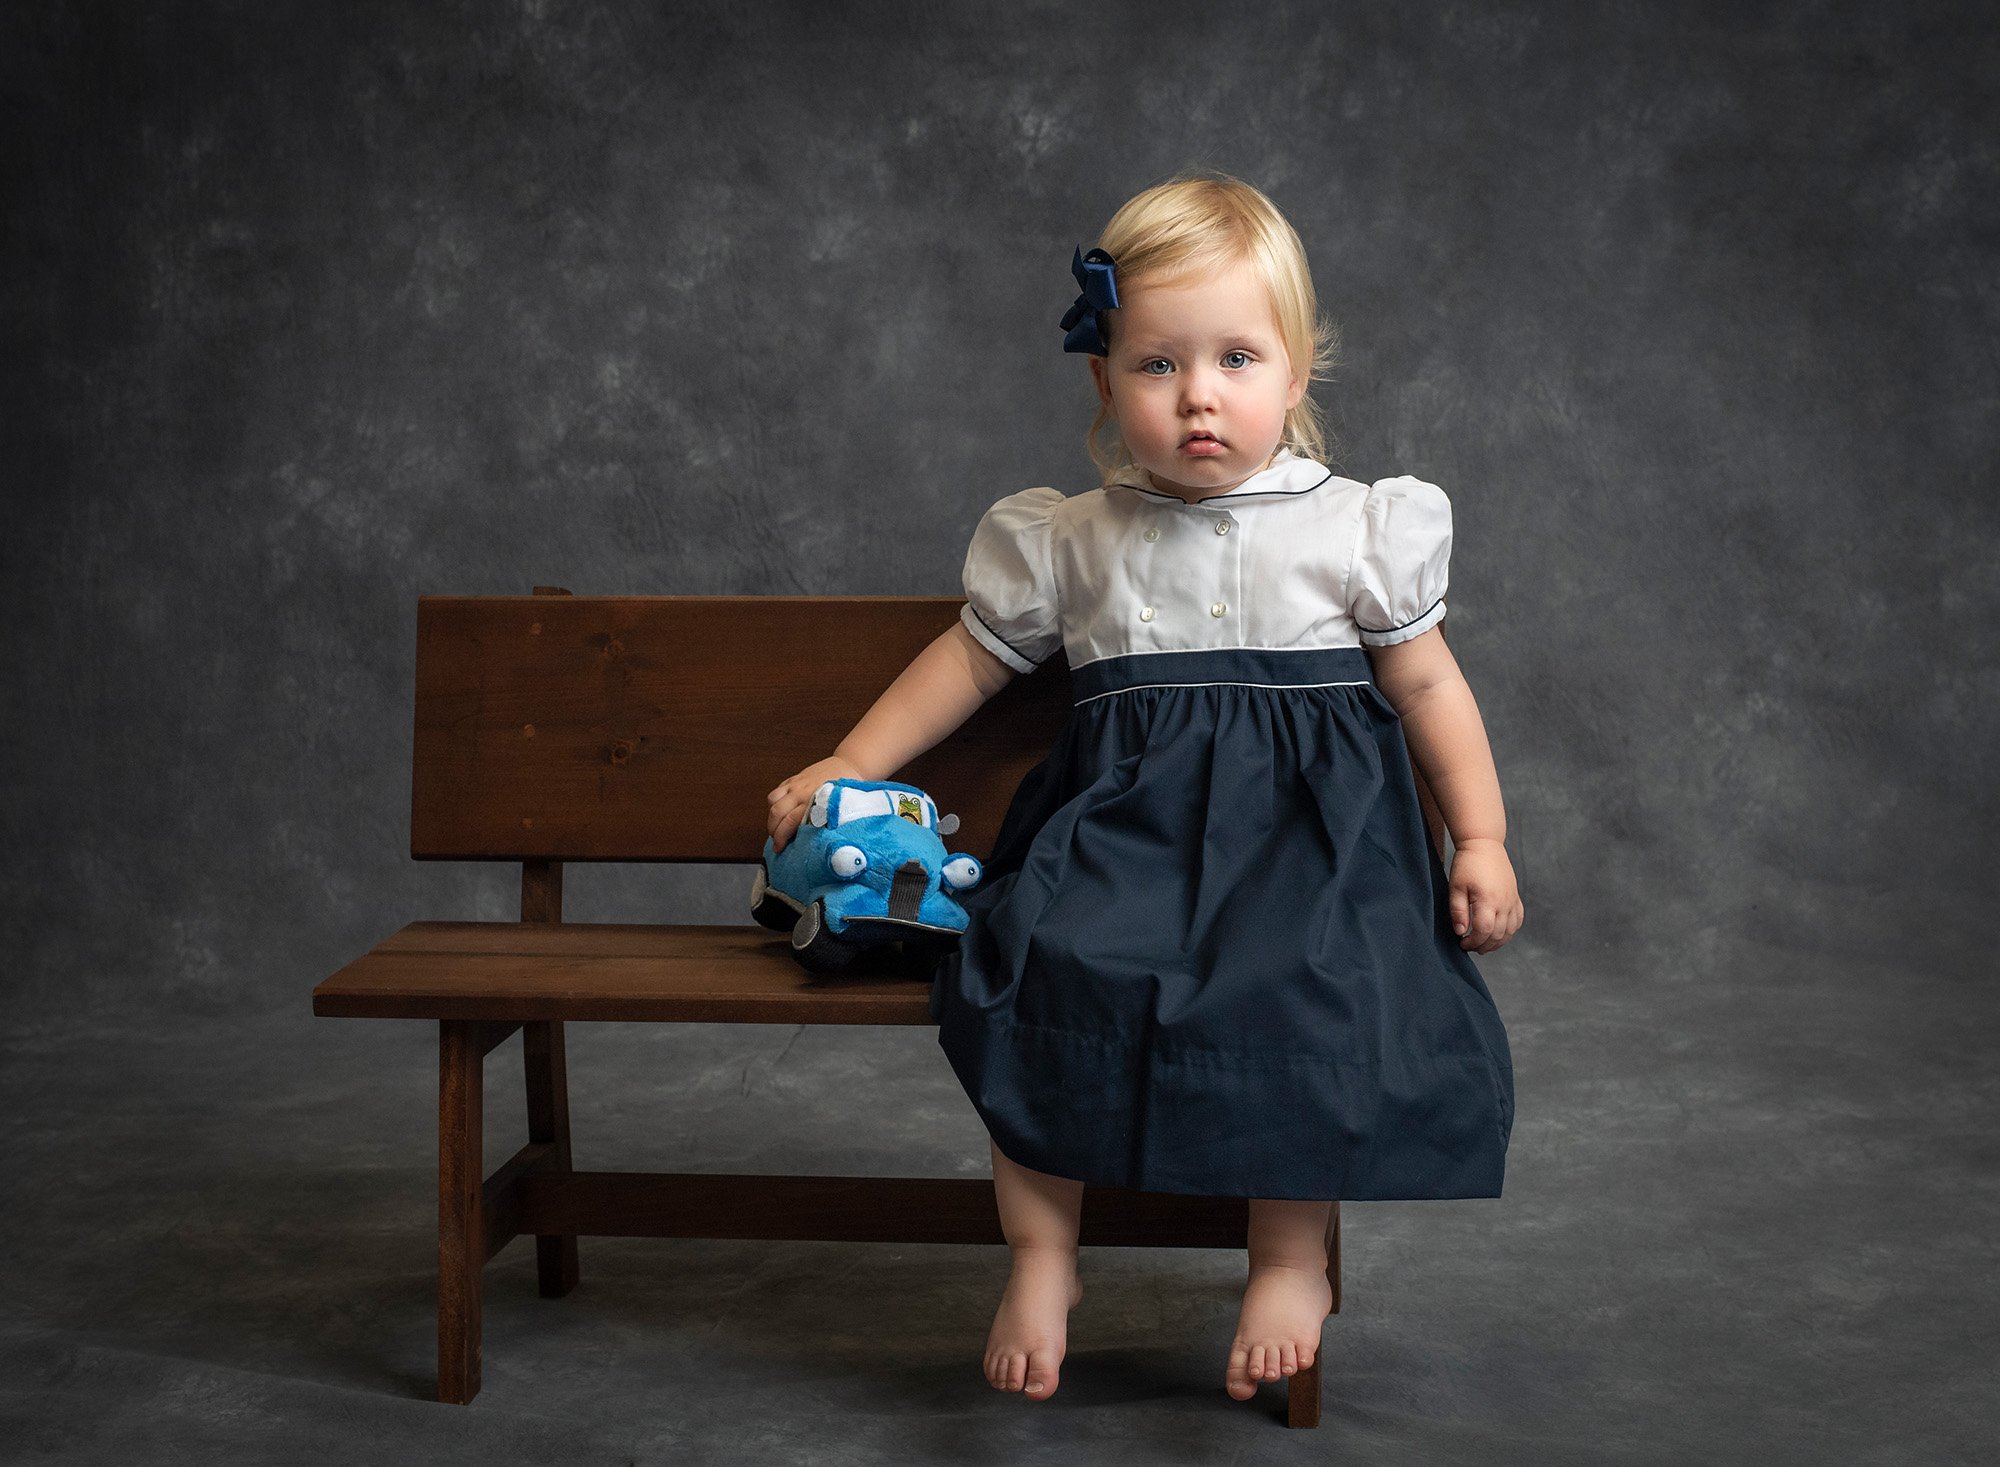 little girl sitting on wooden bench wearing a vintage dress holding a stuffed animal car